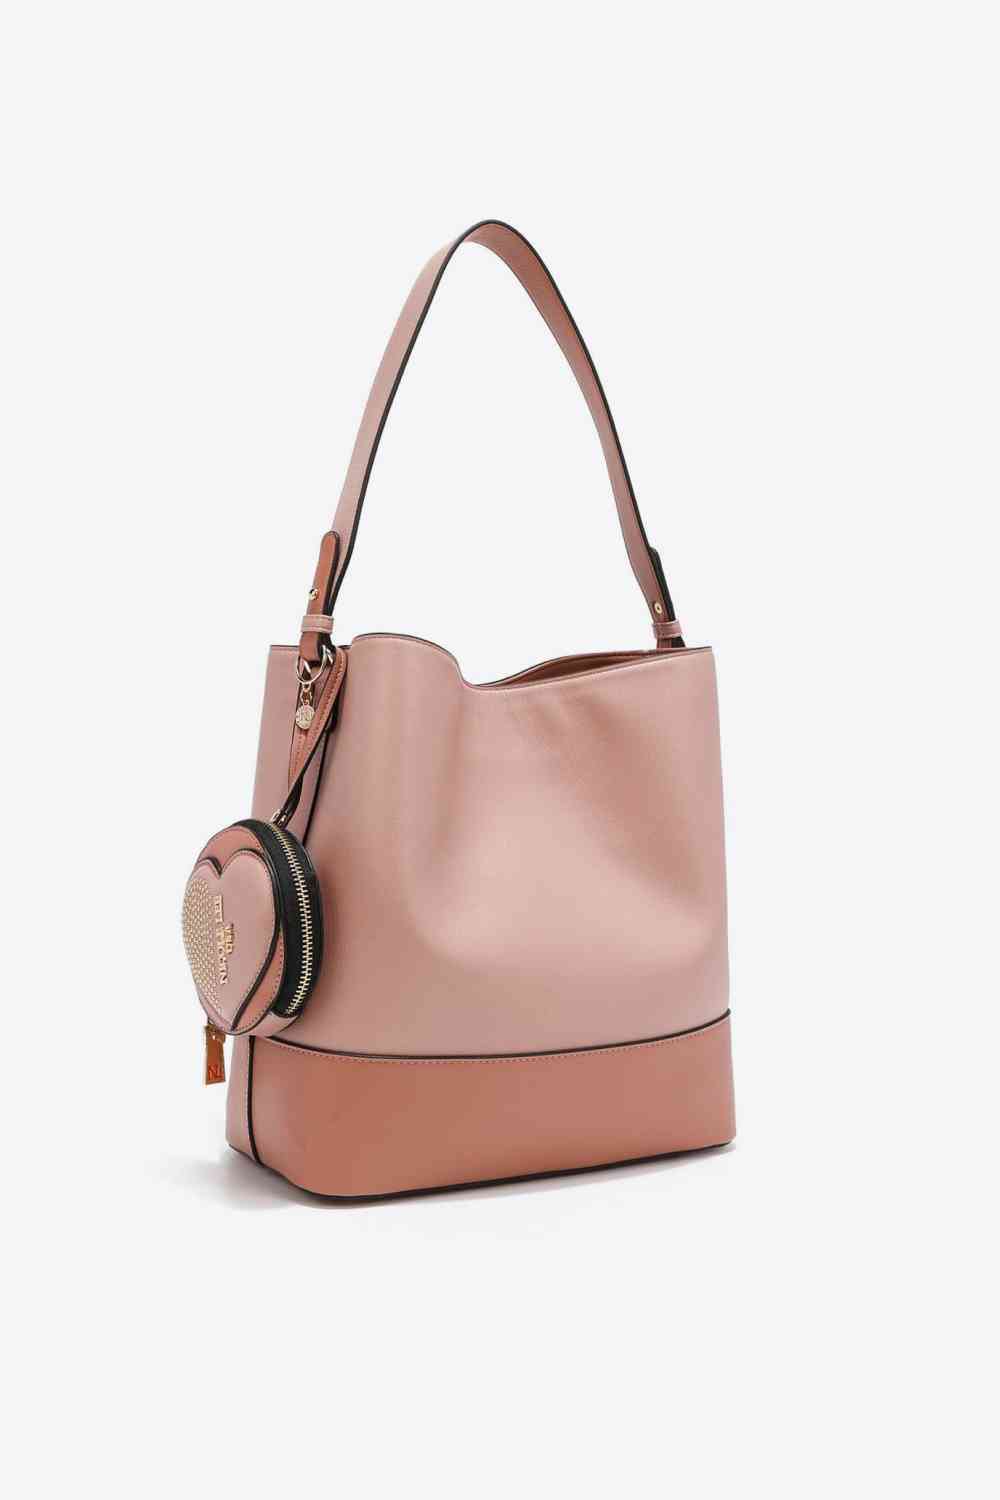 Nicole Lee USA Doing the Most Handbag Dusty Pink One Size